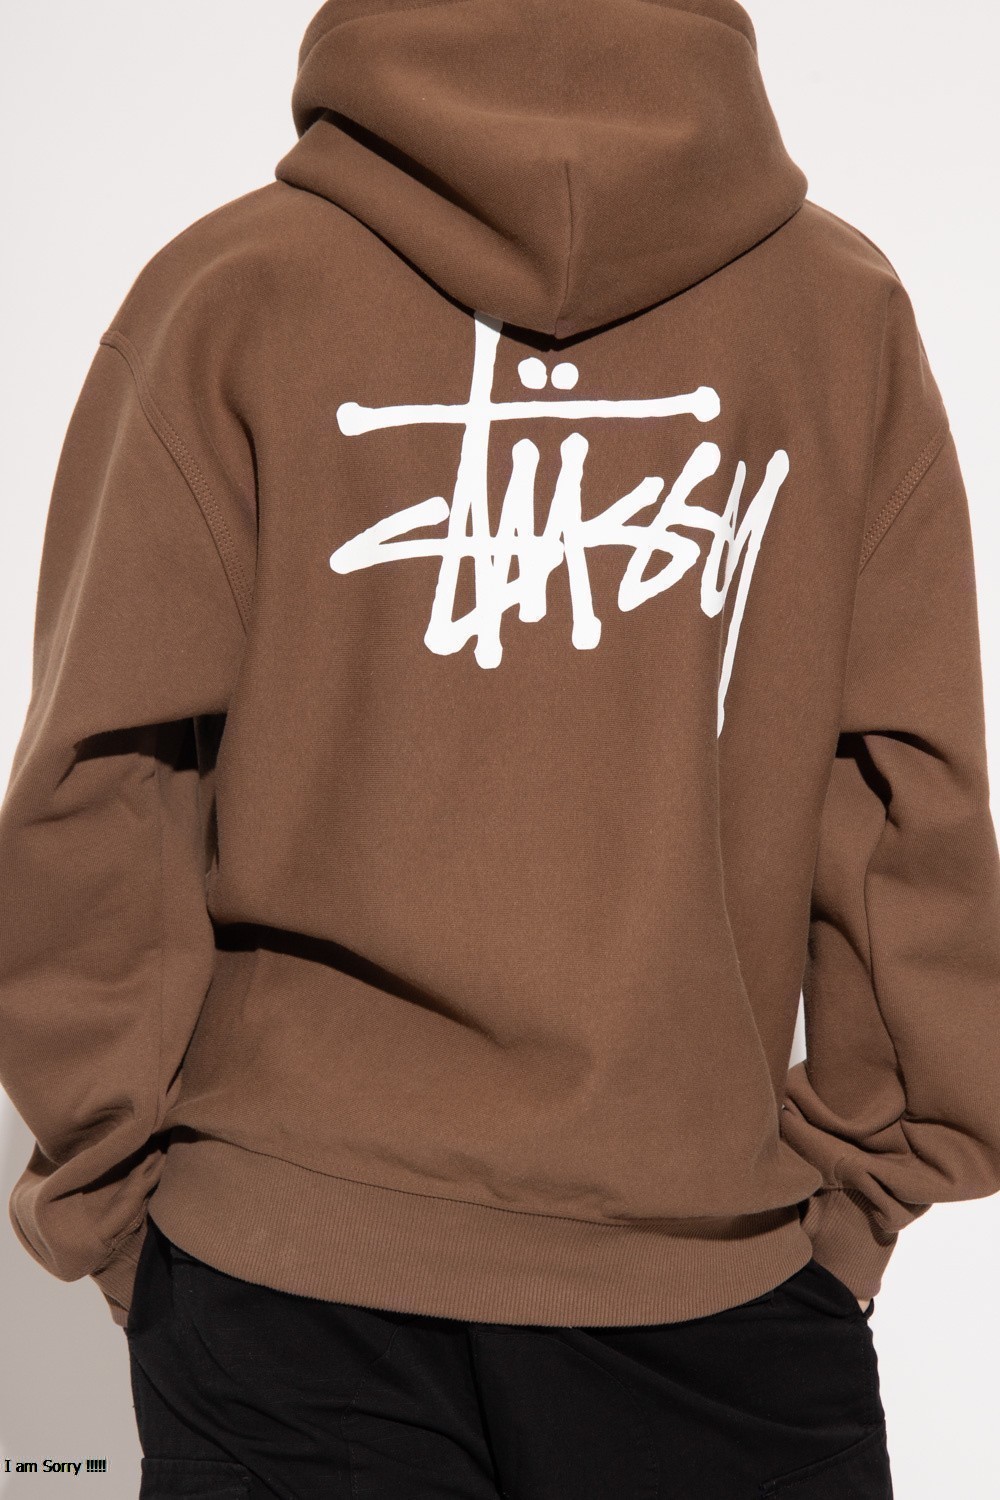 Elevate Your Style with Fashionable Hoodies